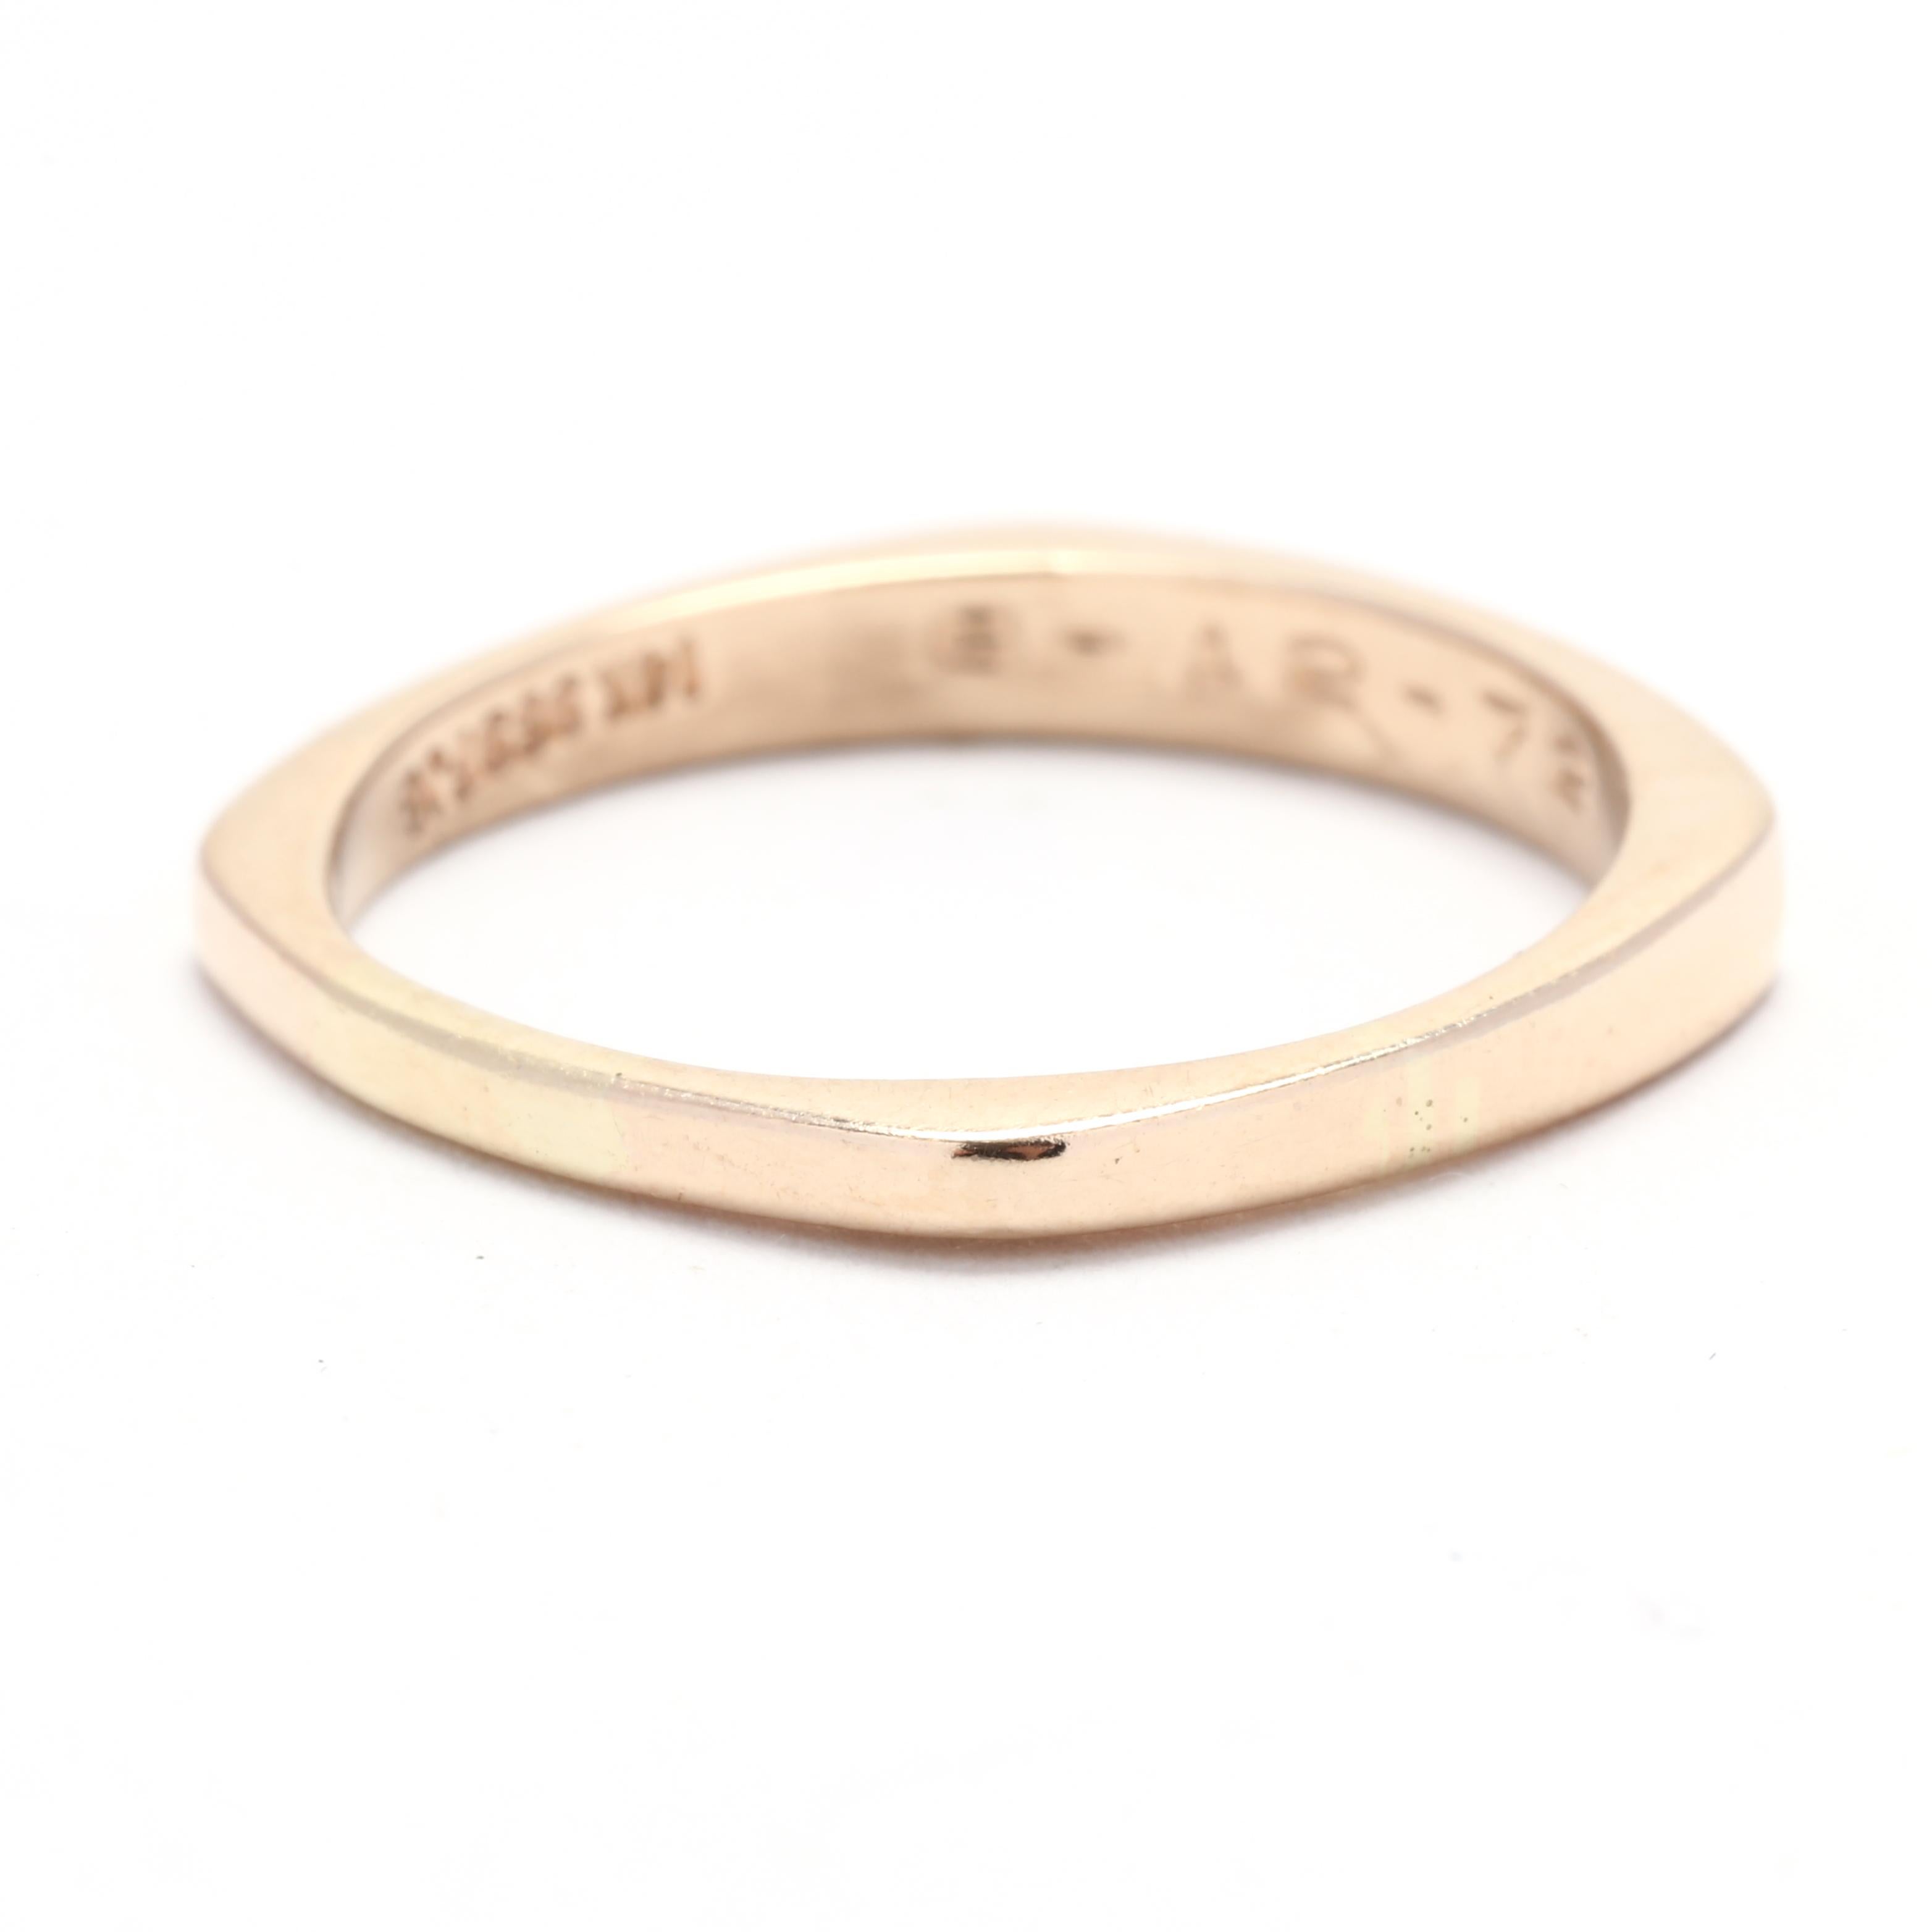 This ring is designed to be stackable, allowing you to effortlessly pair it with other rings to create a personalized and unique look. Whether you choose to wear it as a standalone symbol of commitment or combine it with other bands, this versatile